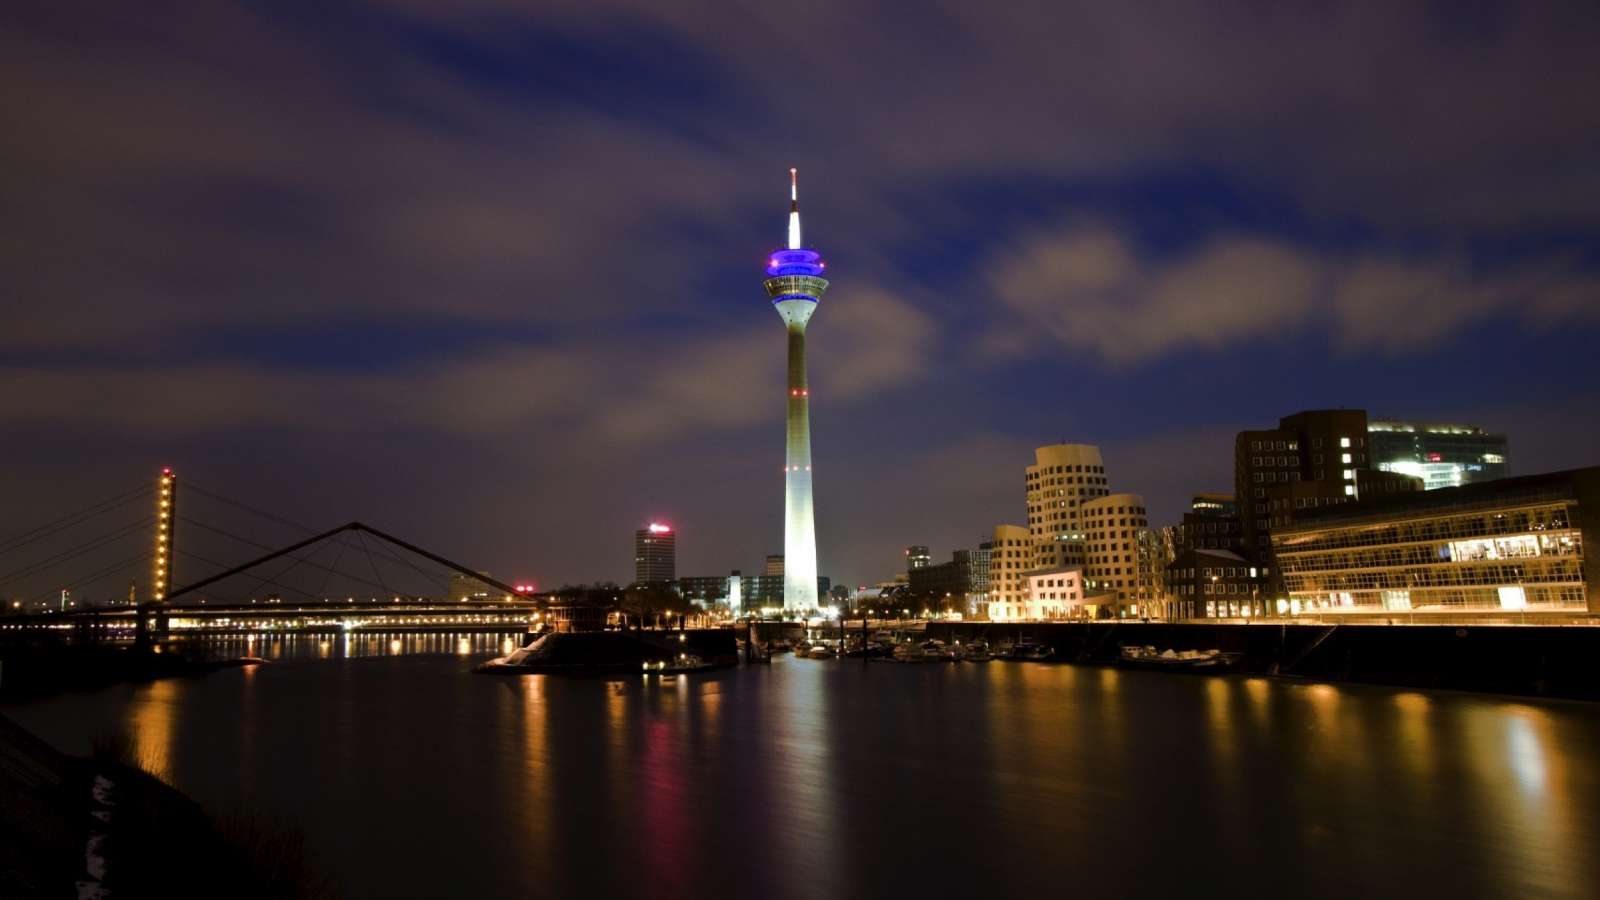 You can best experience Düsseldorf at night by booking with Centro Hotels - always well located!